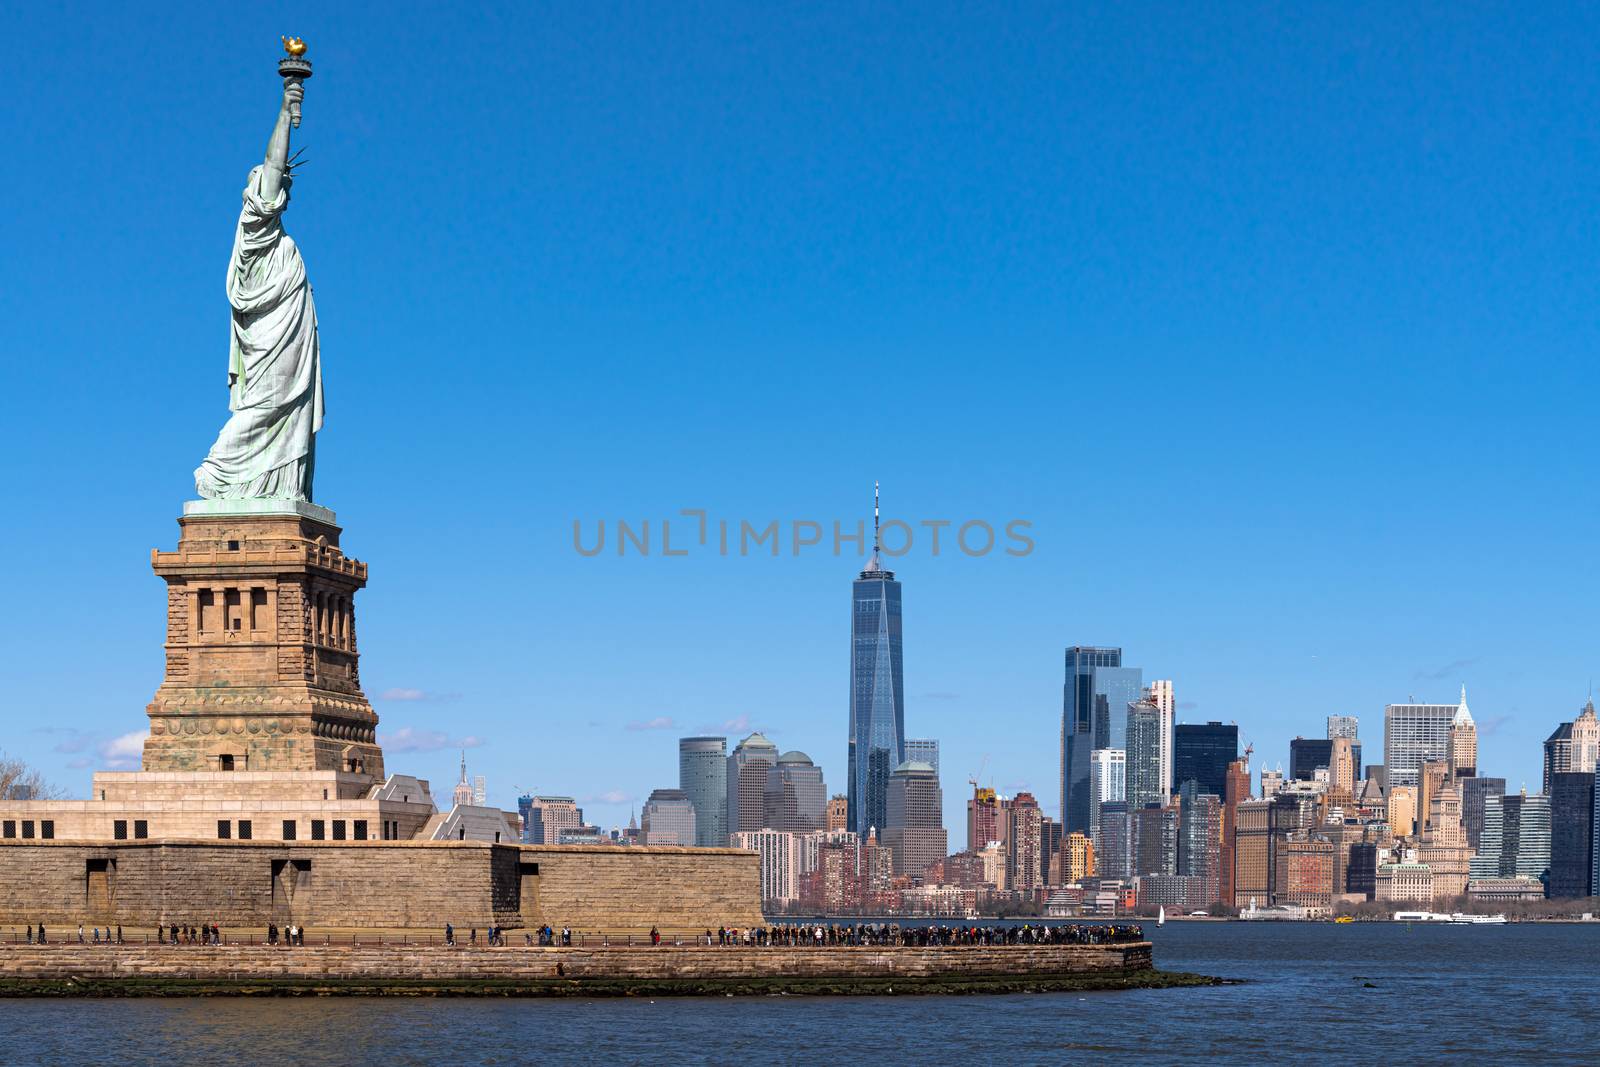 The Statue of Liberty over the Scene of New york cityscape river by Tzido